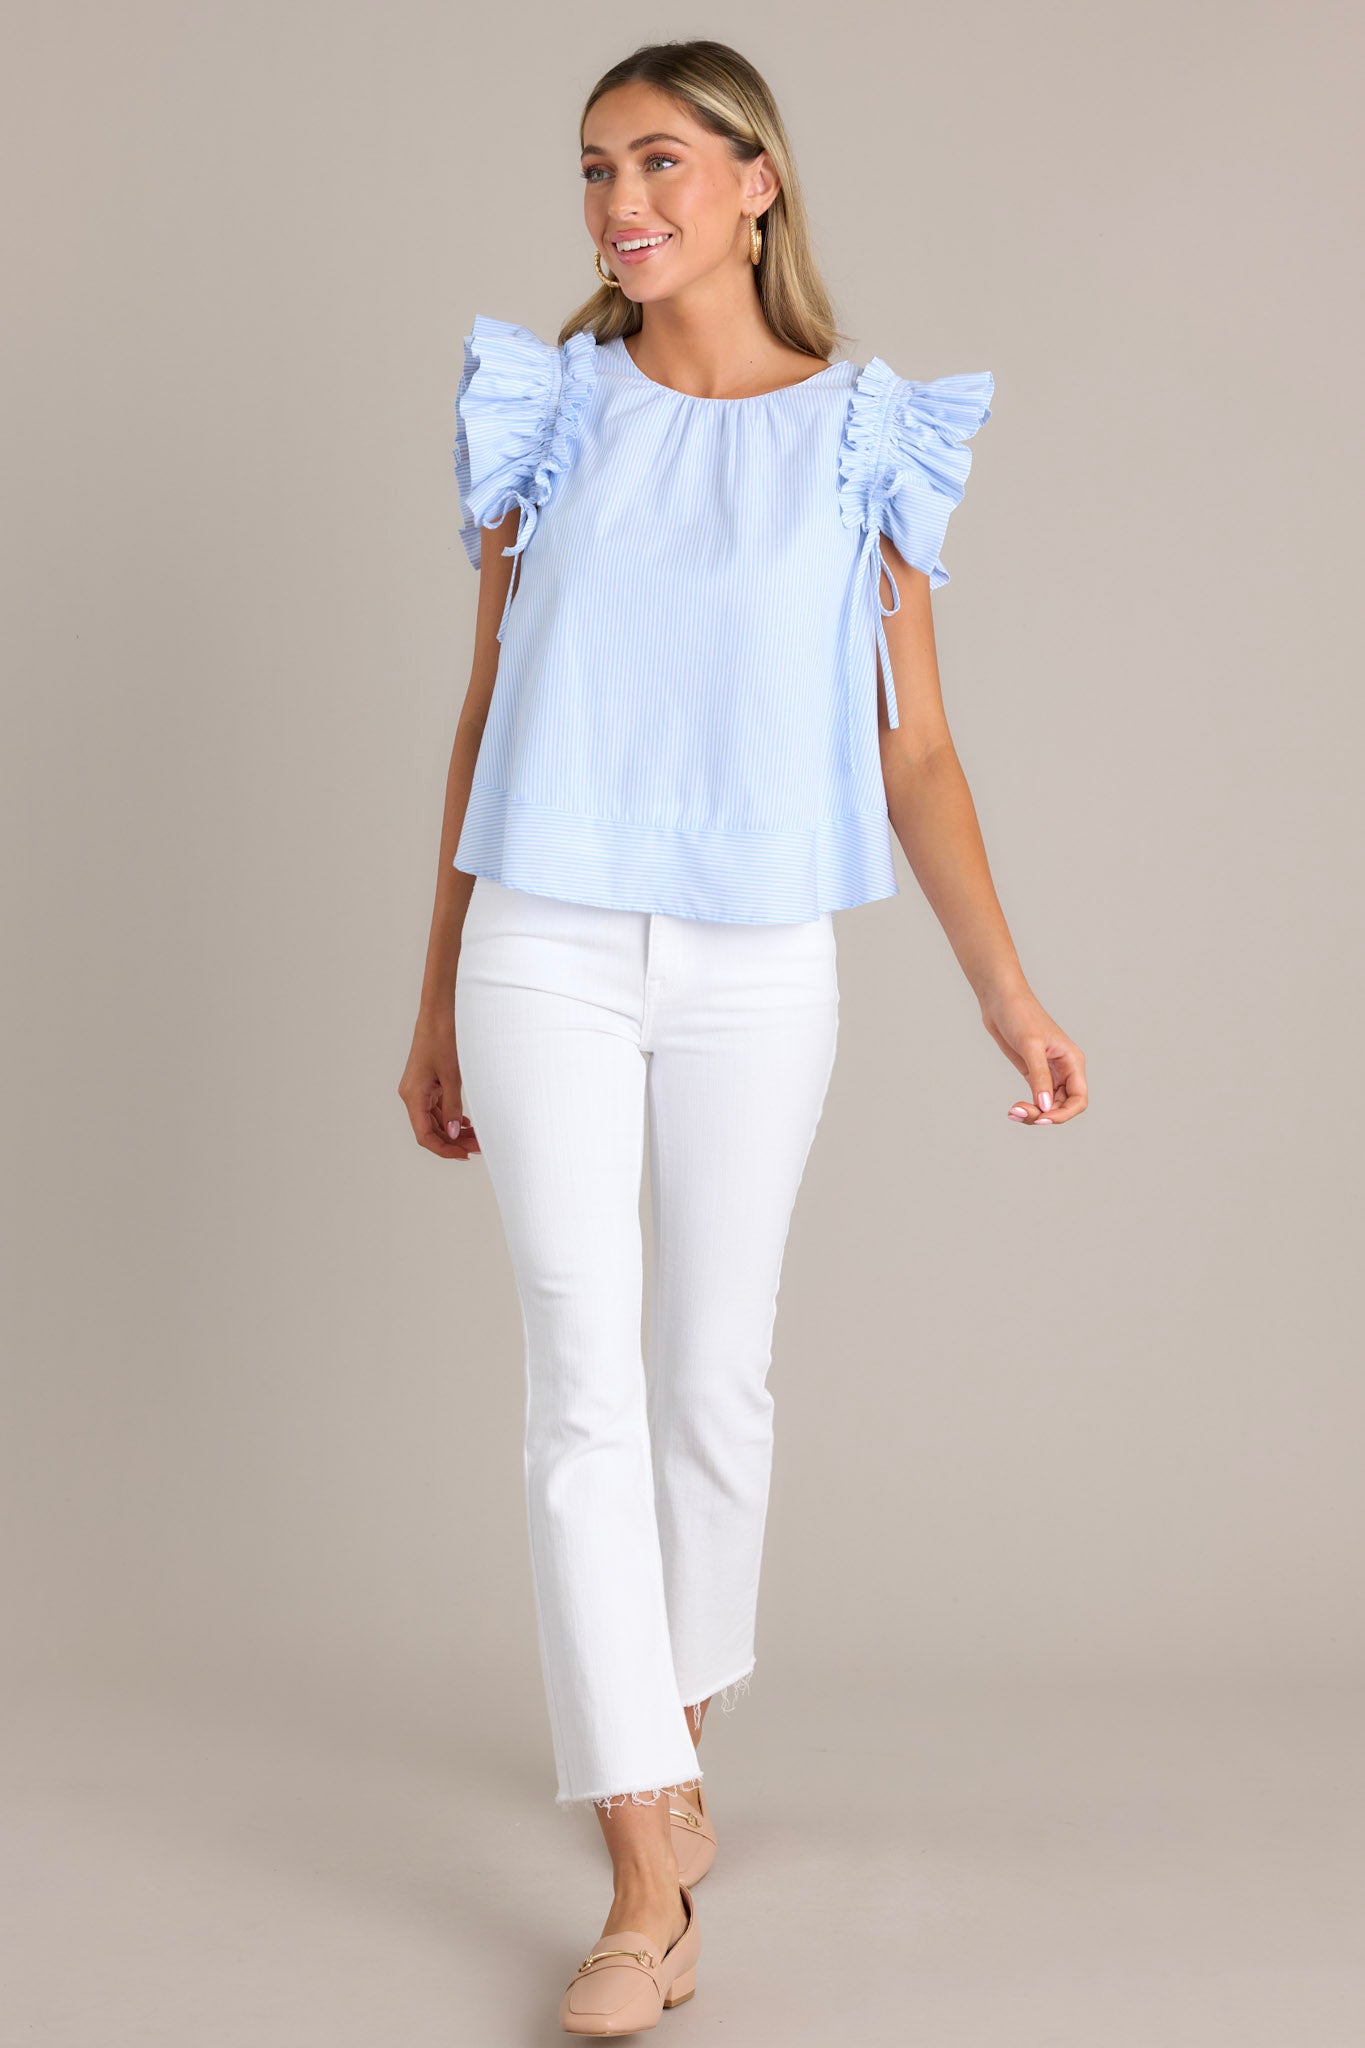 This blue stripe top features a relaxed fit, a crew neckline, vertical stripes, and layered ruffle sleeves with adjustable bows for a custom fit.